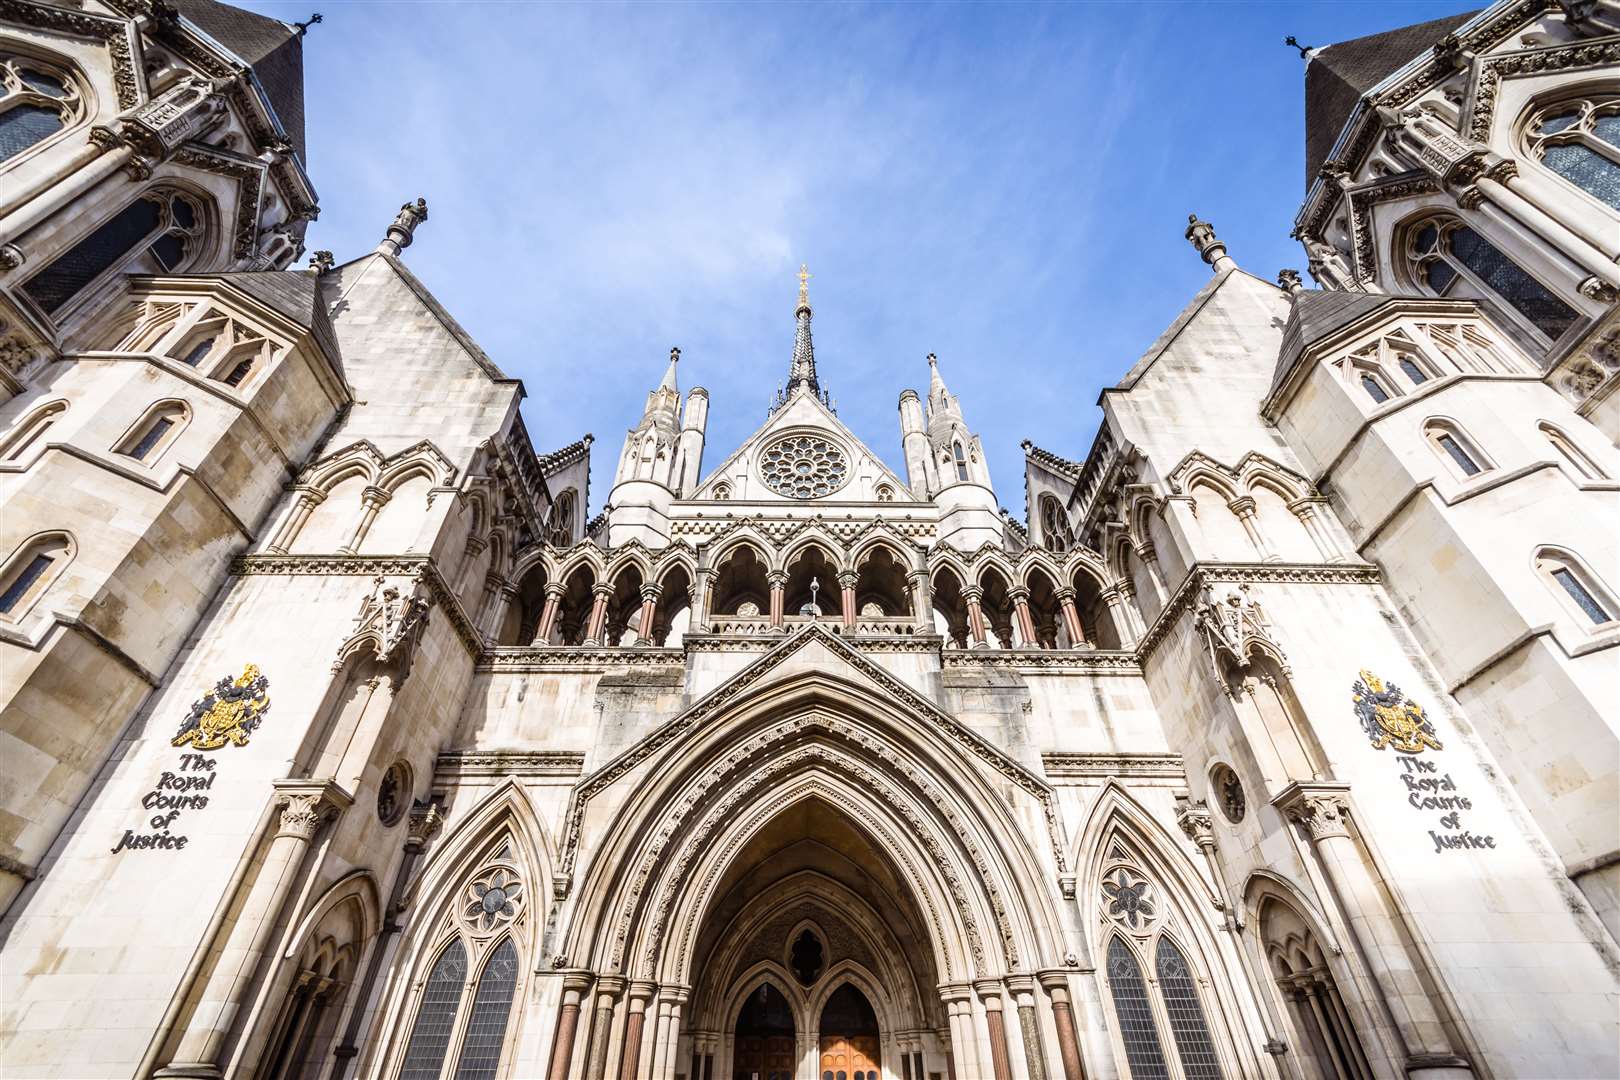 The Royal Courts of Justice in Westminster, houses the High Court and Court of Appeal